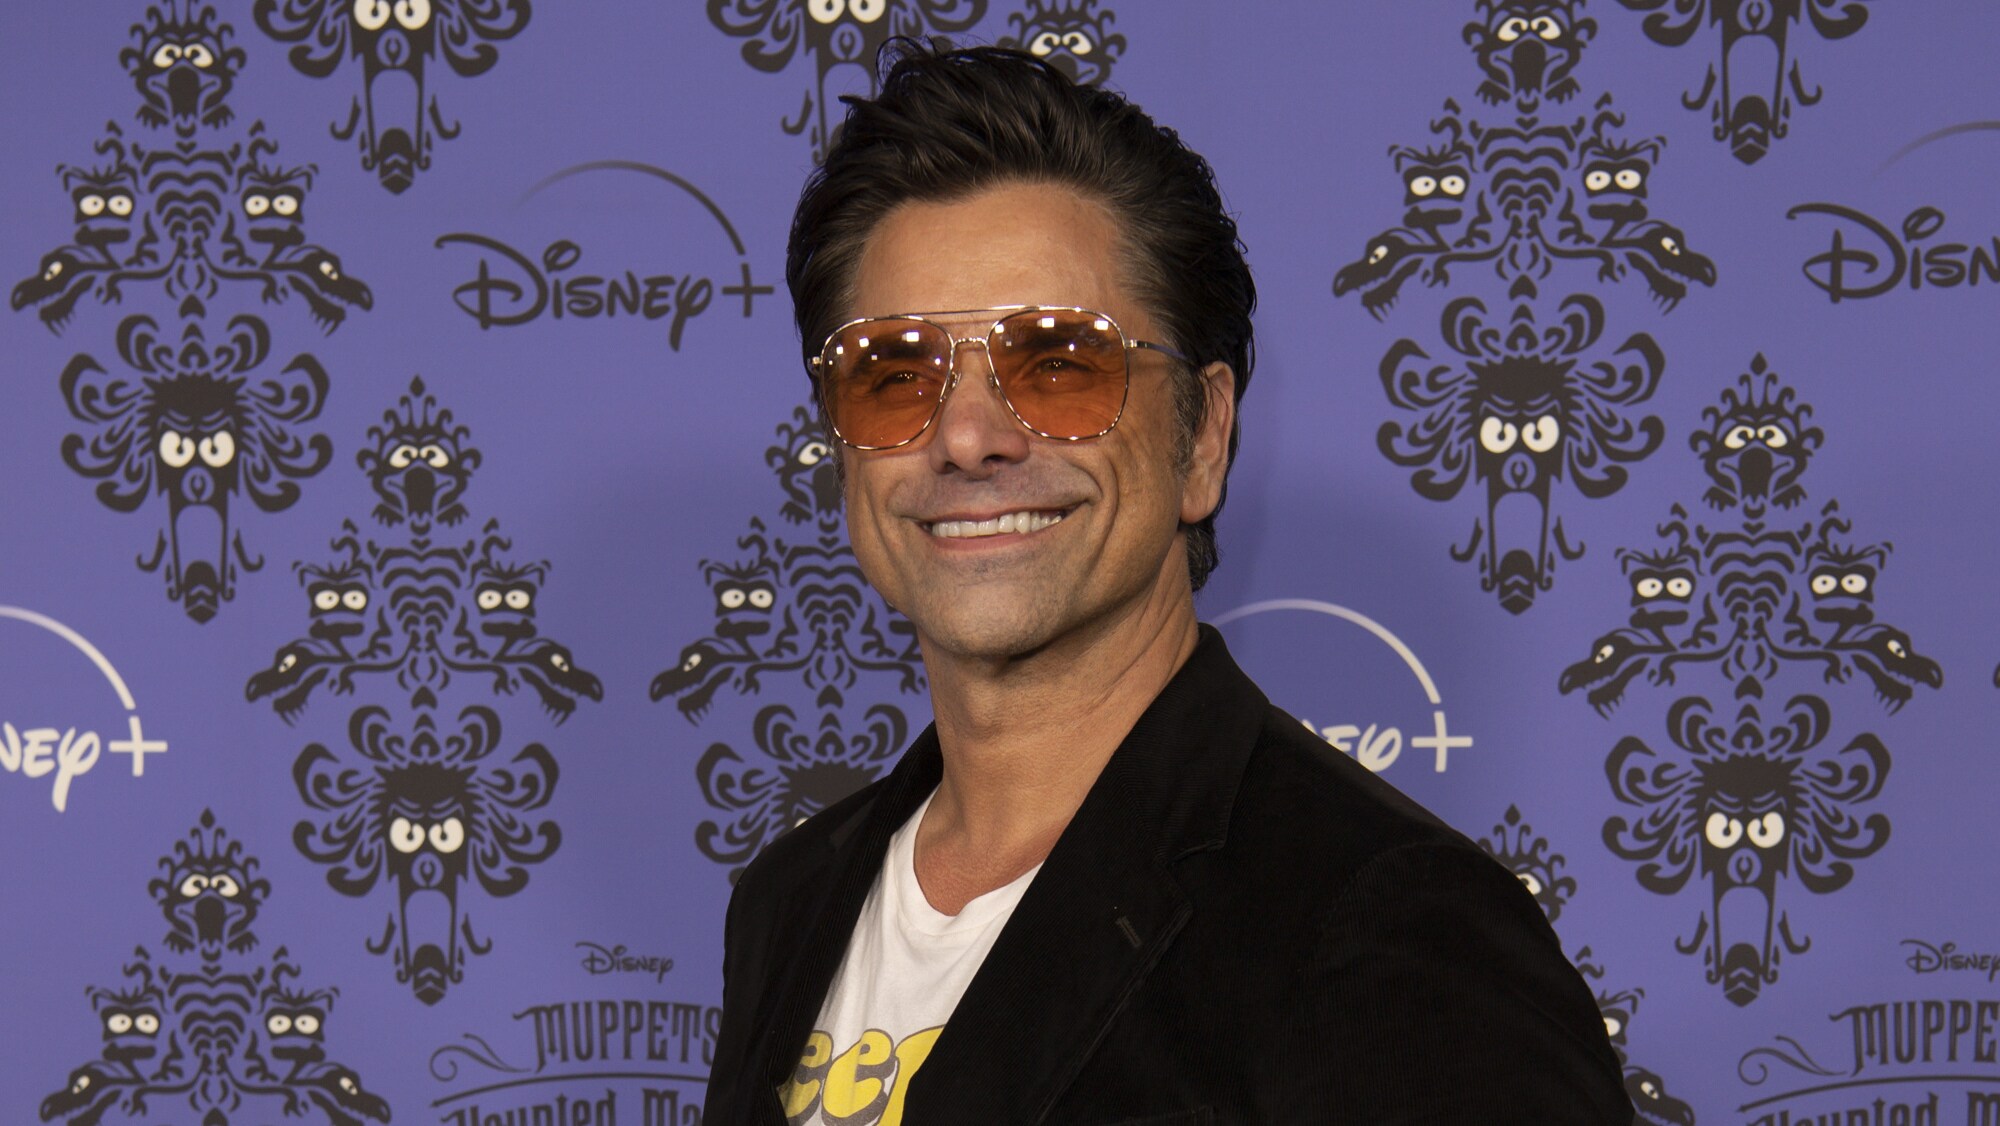 MUPPETS HAUNTED MANSION - Stars of The Muppets first-ever Halloween special "Muppets Haunted Mansion" attended the Drive-In Premiere Event at West Los Angeles College, Thursday, October 7. "Muppets Haunted Mansion" is available to stream Friday, October 8 on Disney+. (Disney/Richard Harbaugh) JOHN STAMOS